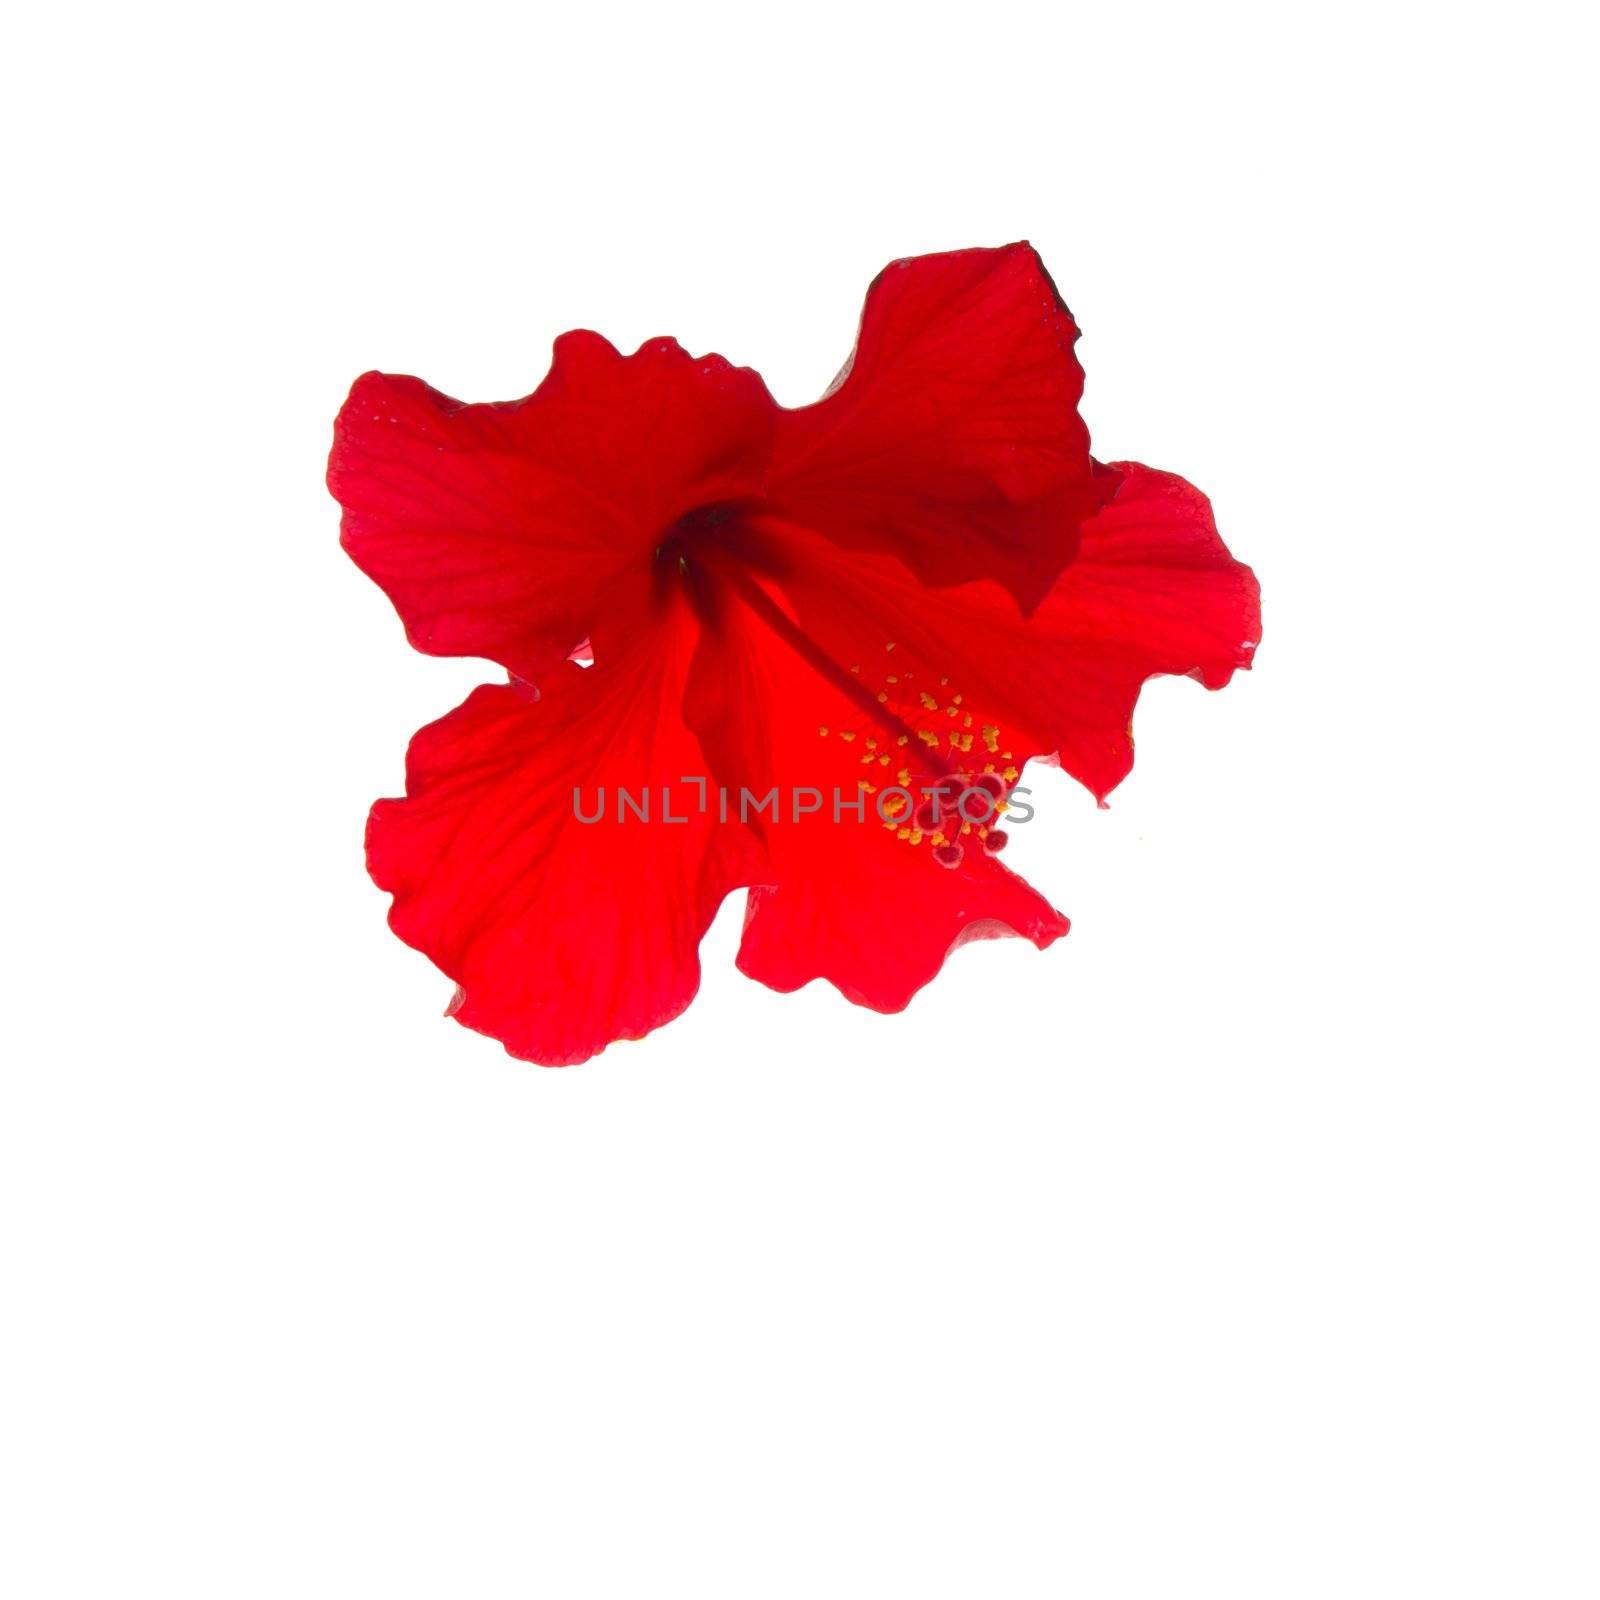 hibiscus on red color isolated over white studio background